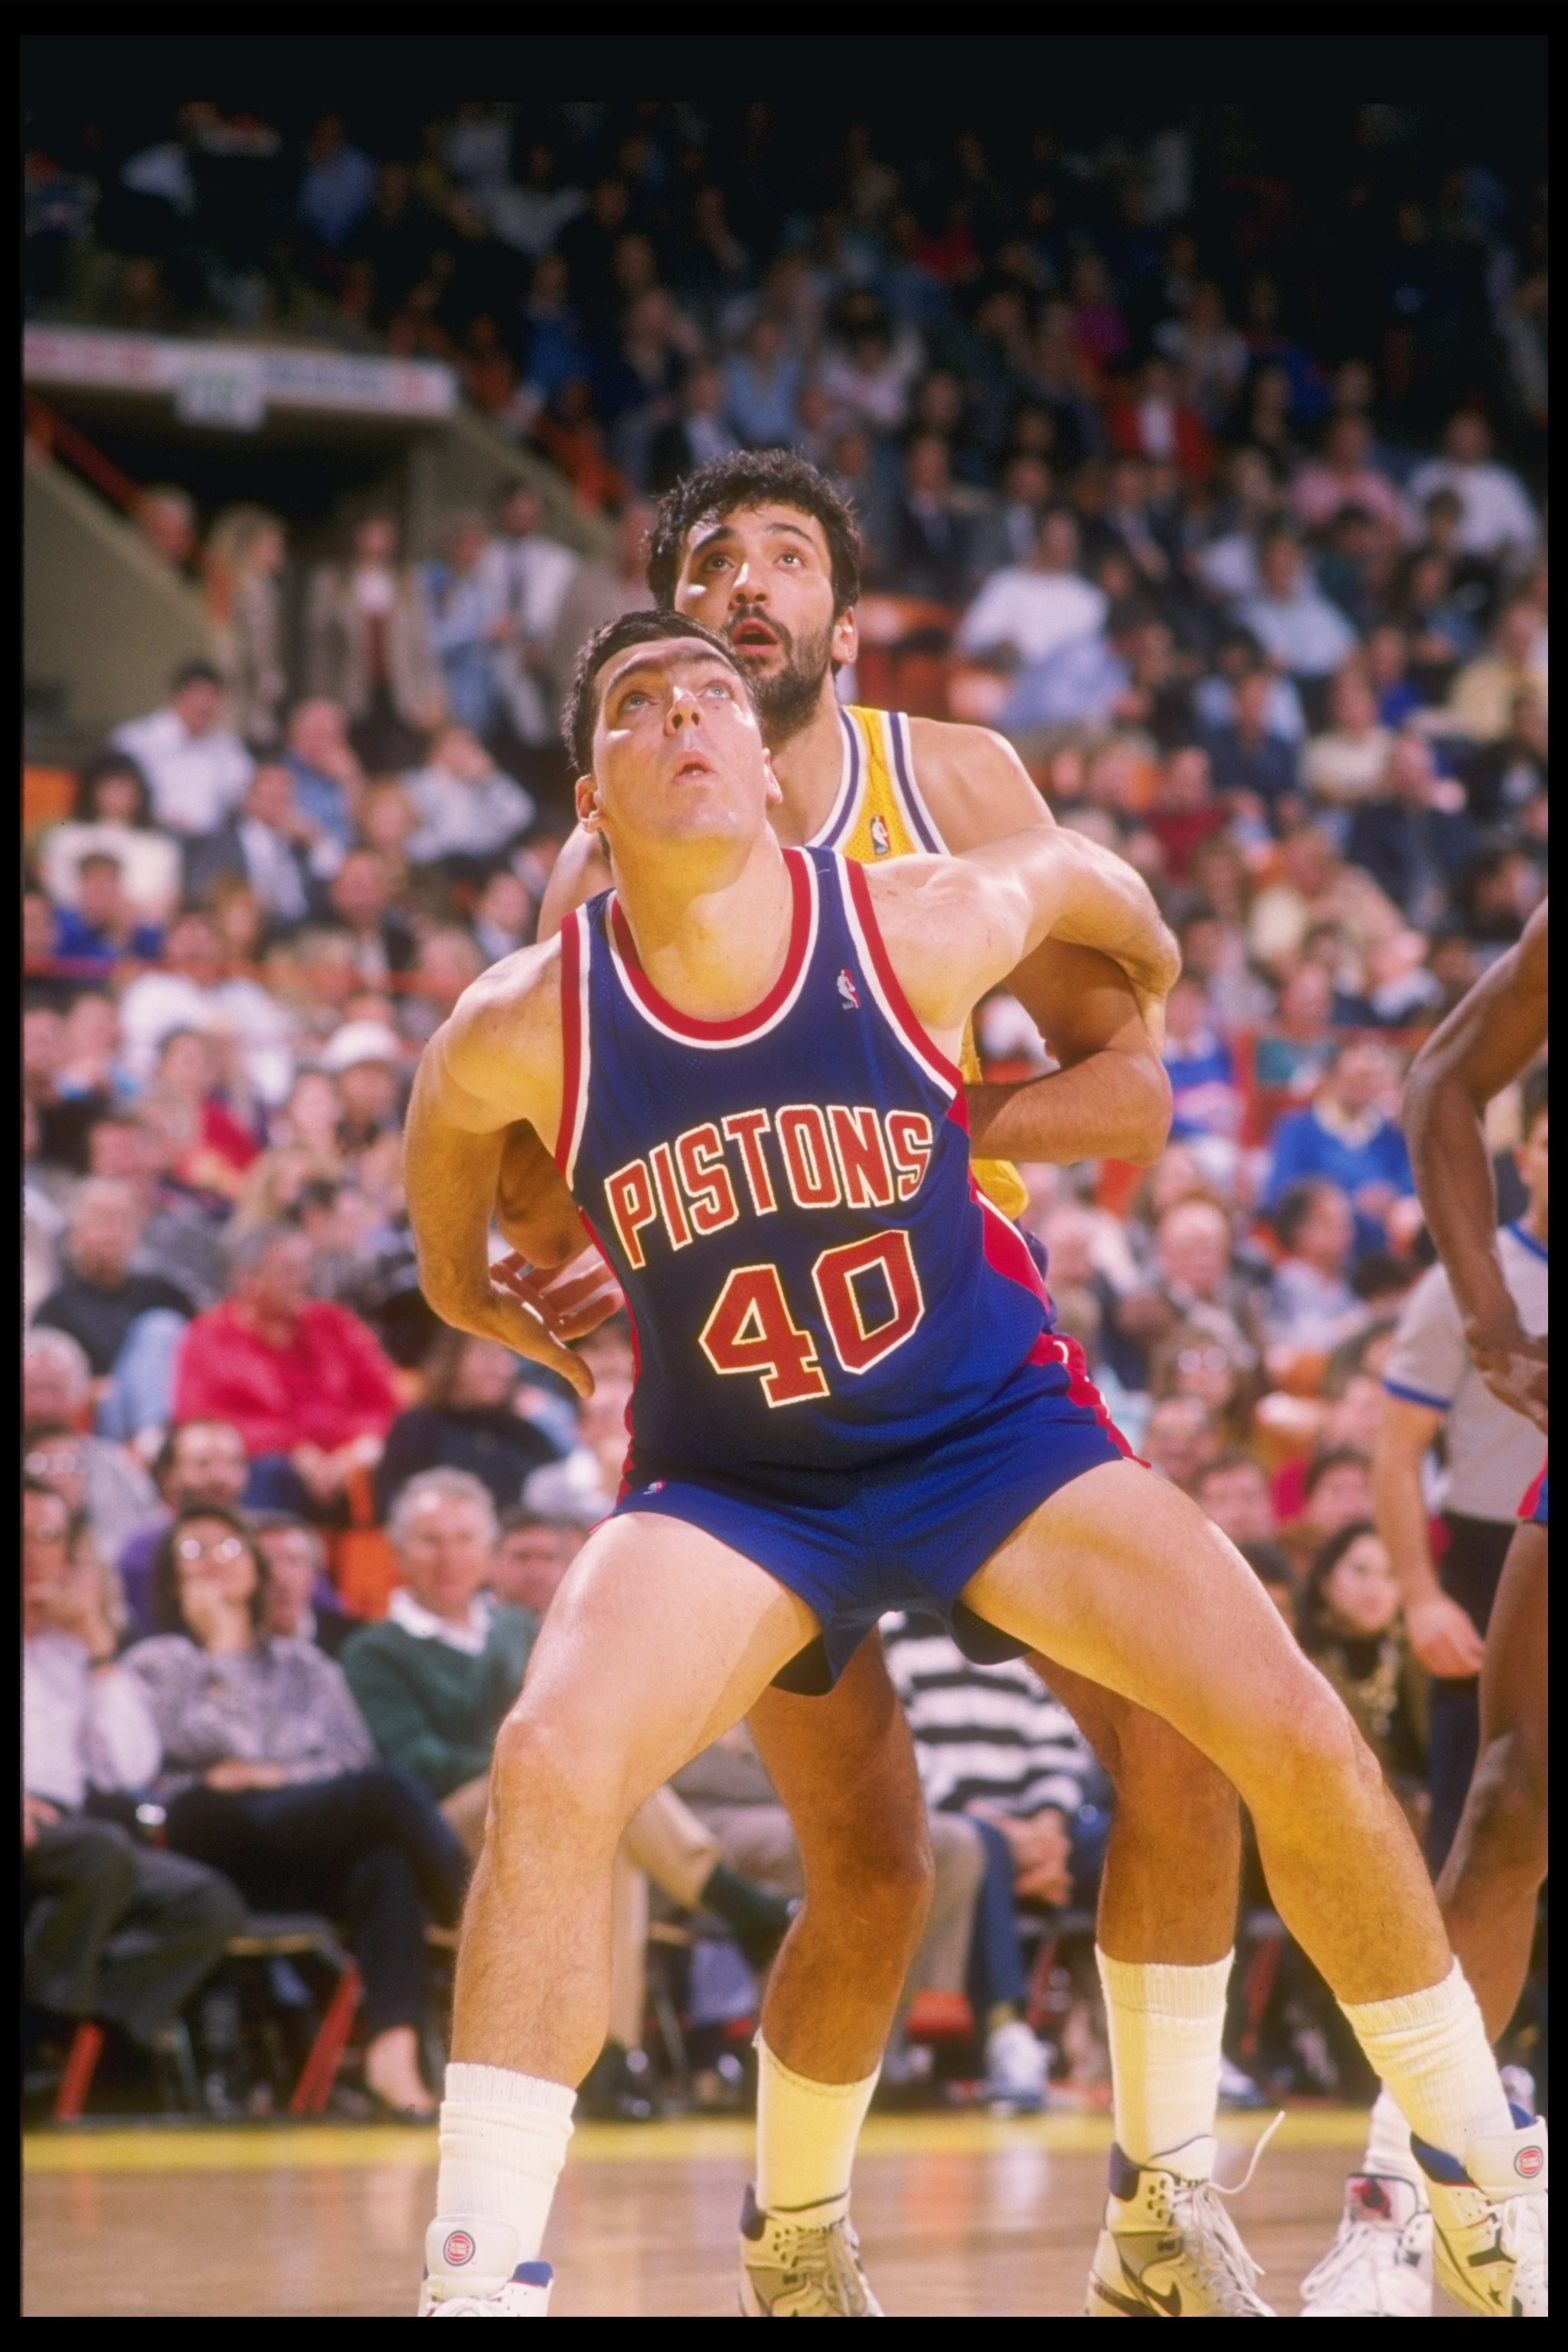 1989-1990:  Bill Laimbeer of the Detroit Pistons looks for the ball during a game. Mandatory Credit: Mike Powell  /Allsport Mandatory Credit: Mike Powell  /Allsport